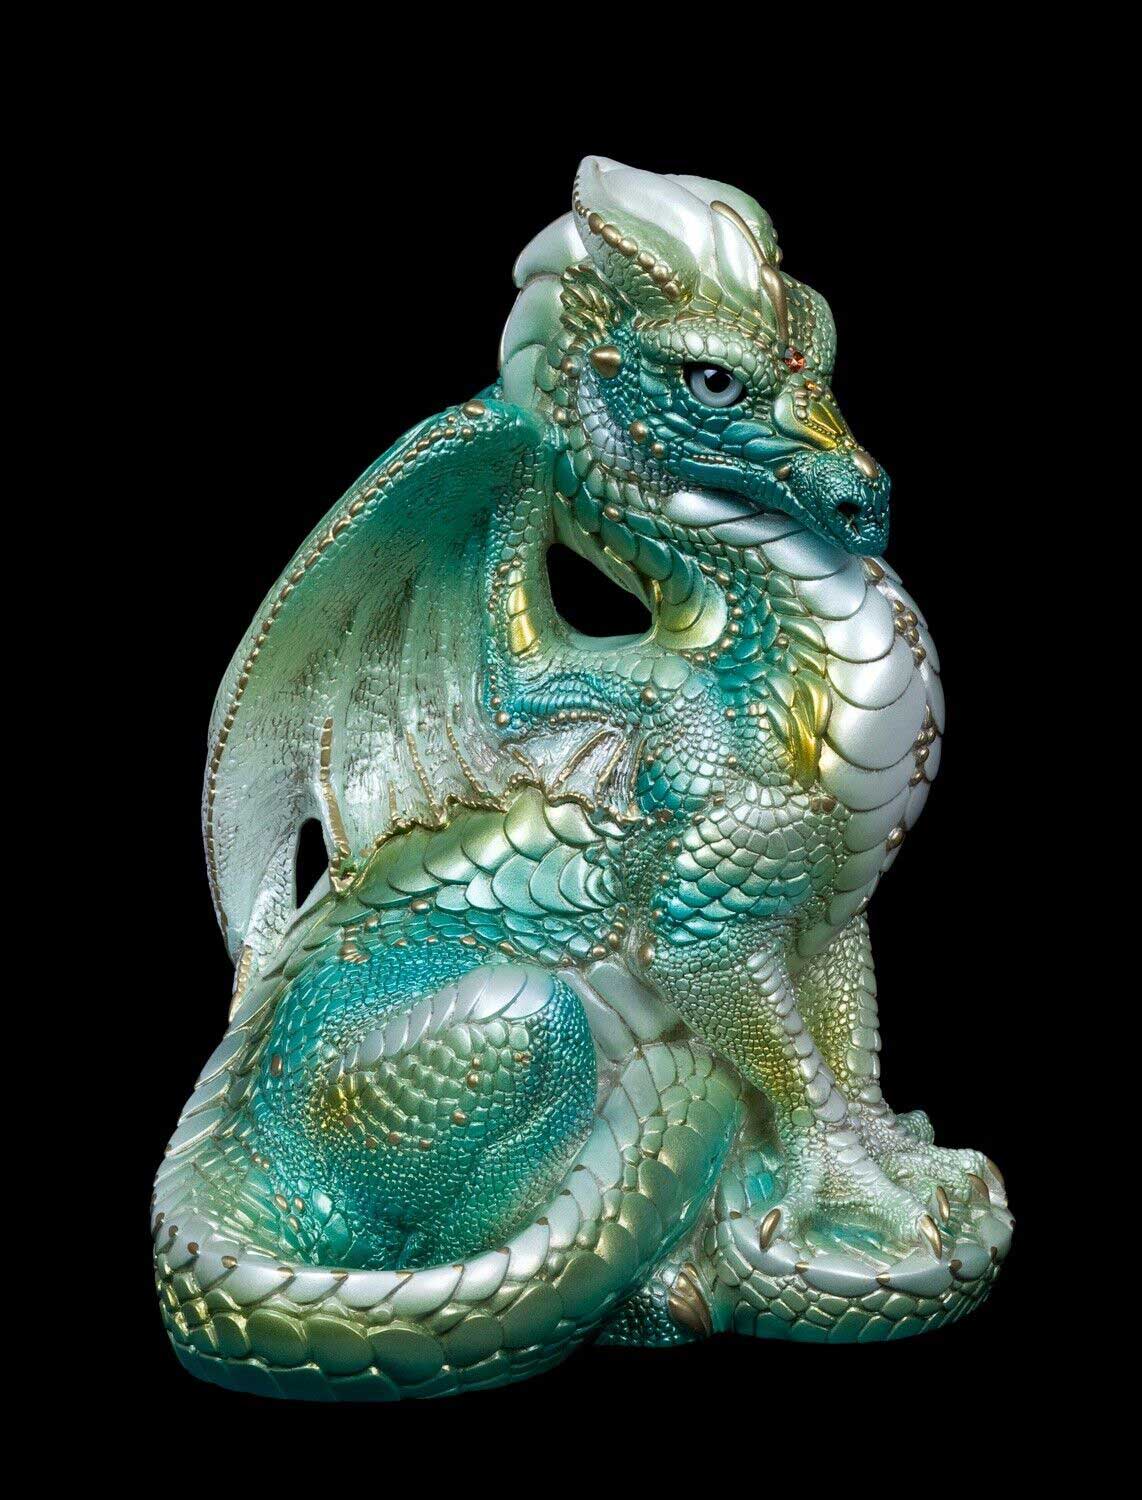 20230331-Seaglass-Male-Dragon-Test-Paint-1-by-Gina